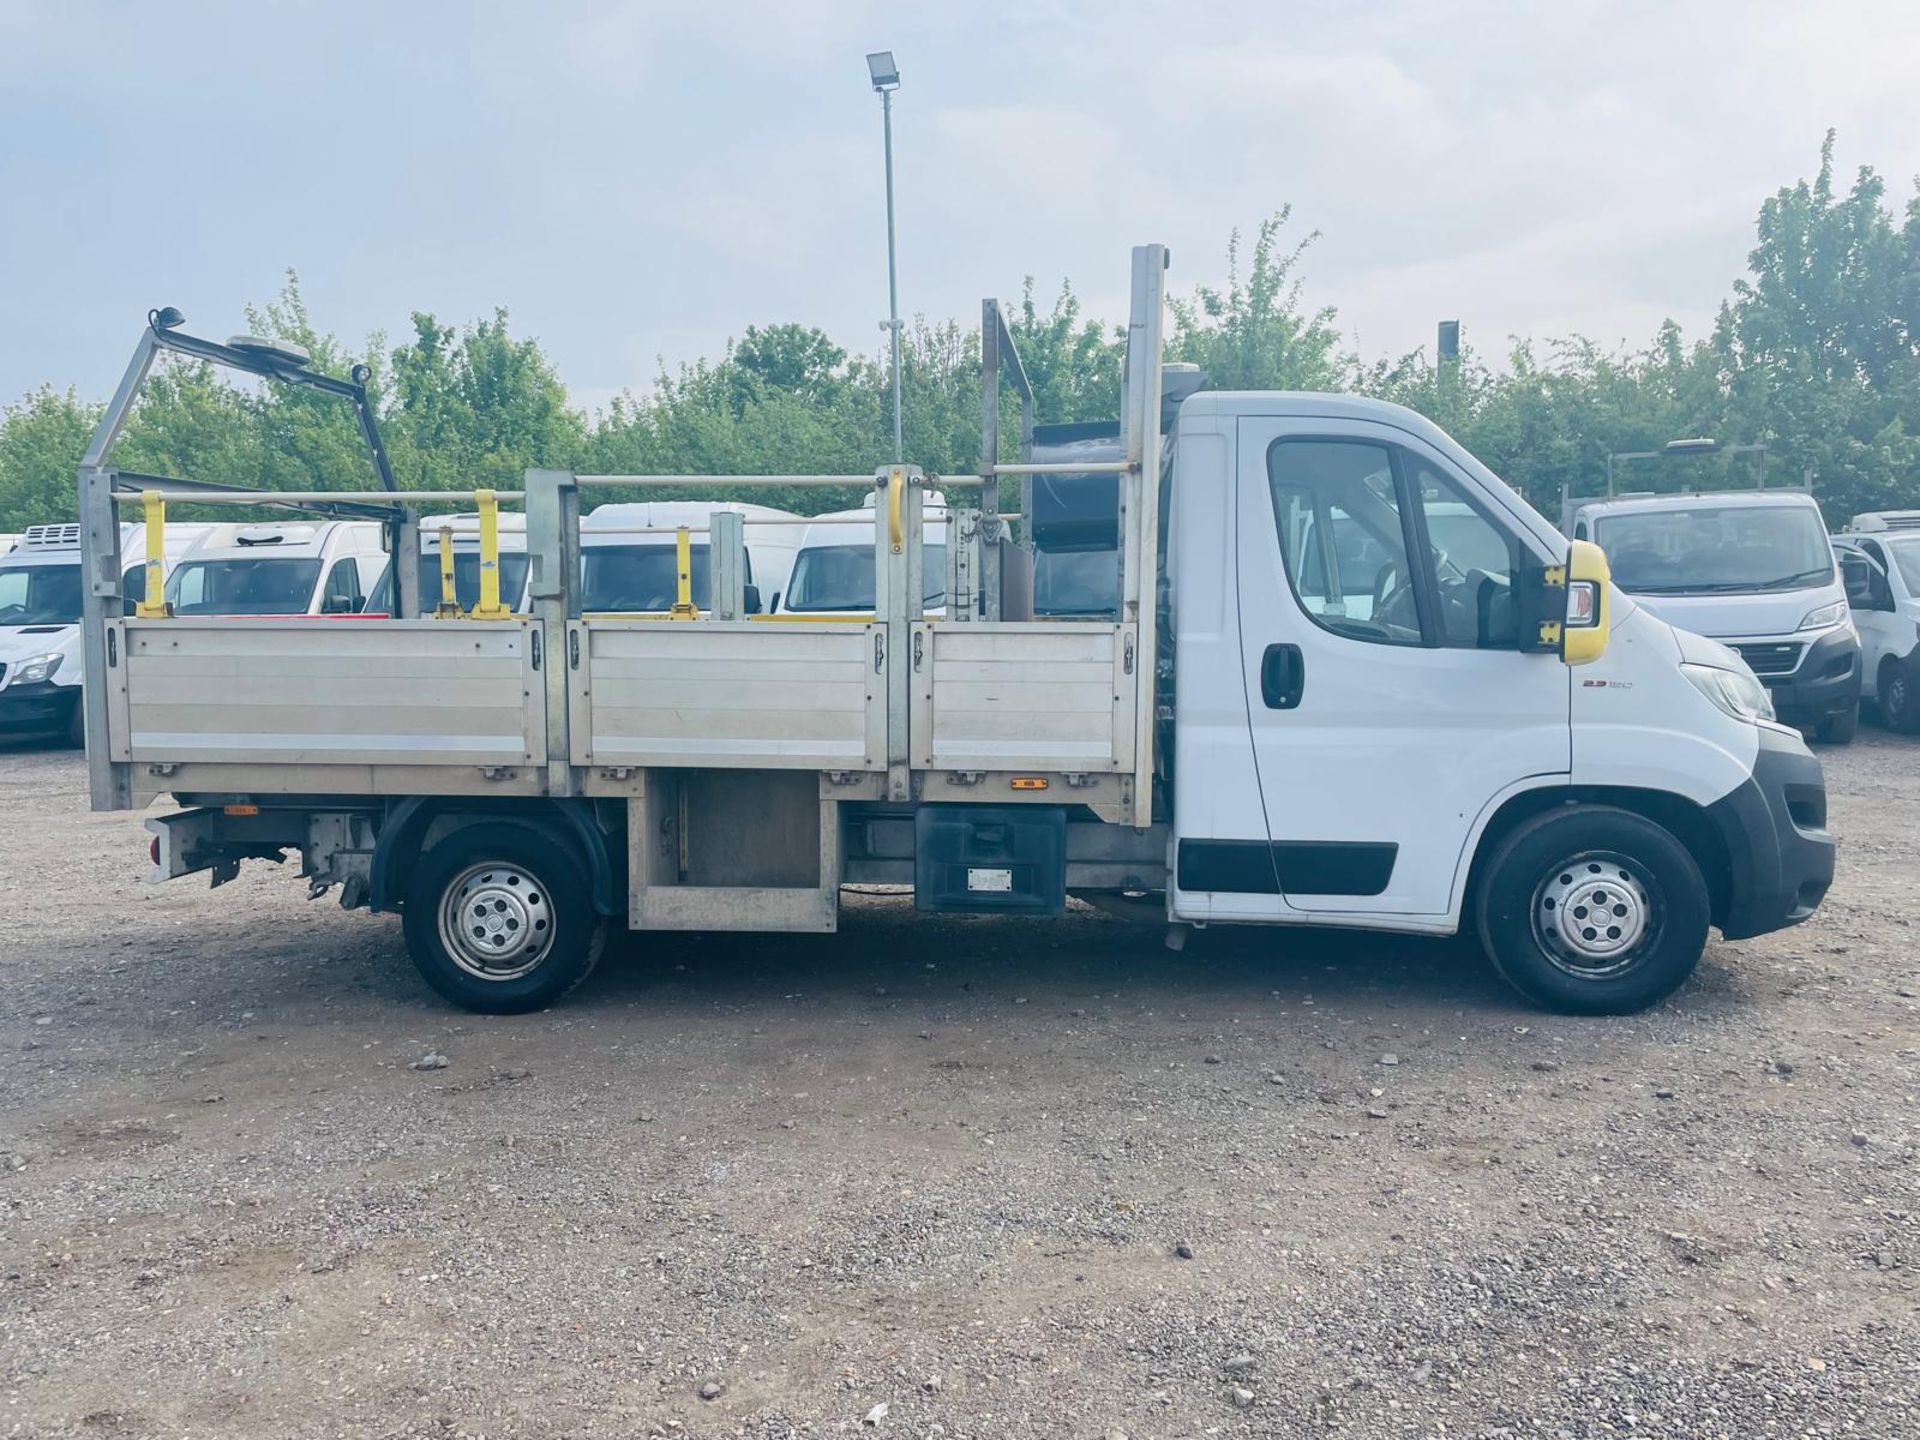 Fiat Ducato 35 Maxi 2.3 MultiJet 130 L3H1 Dropside 2019 '69 Reg'-1 Former keepers - Only 76,029 - Image 13 of 27